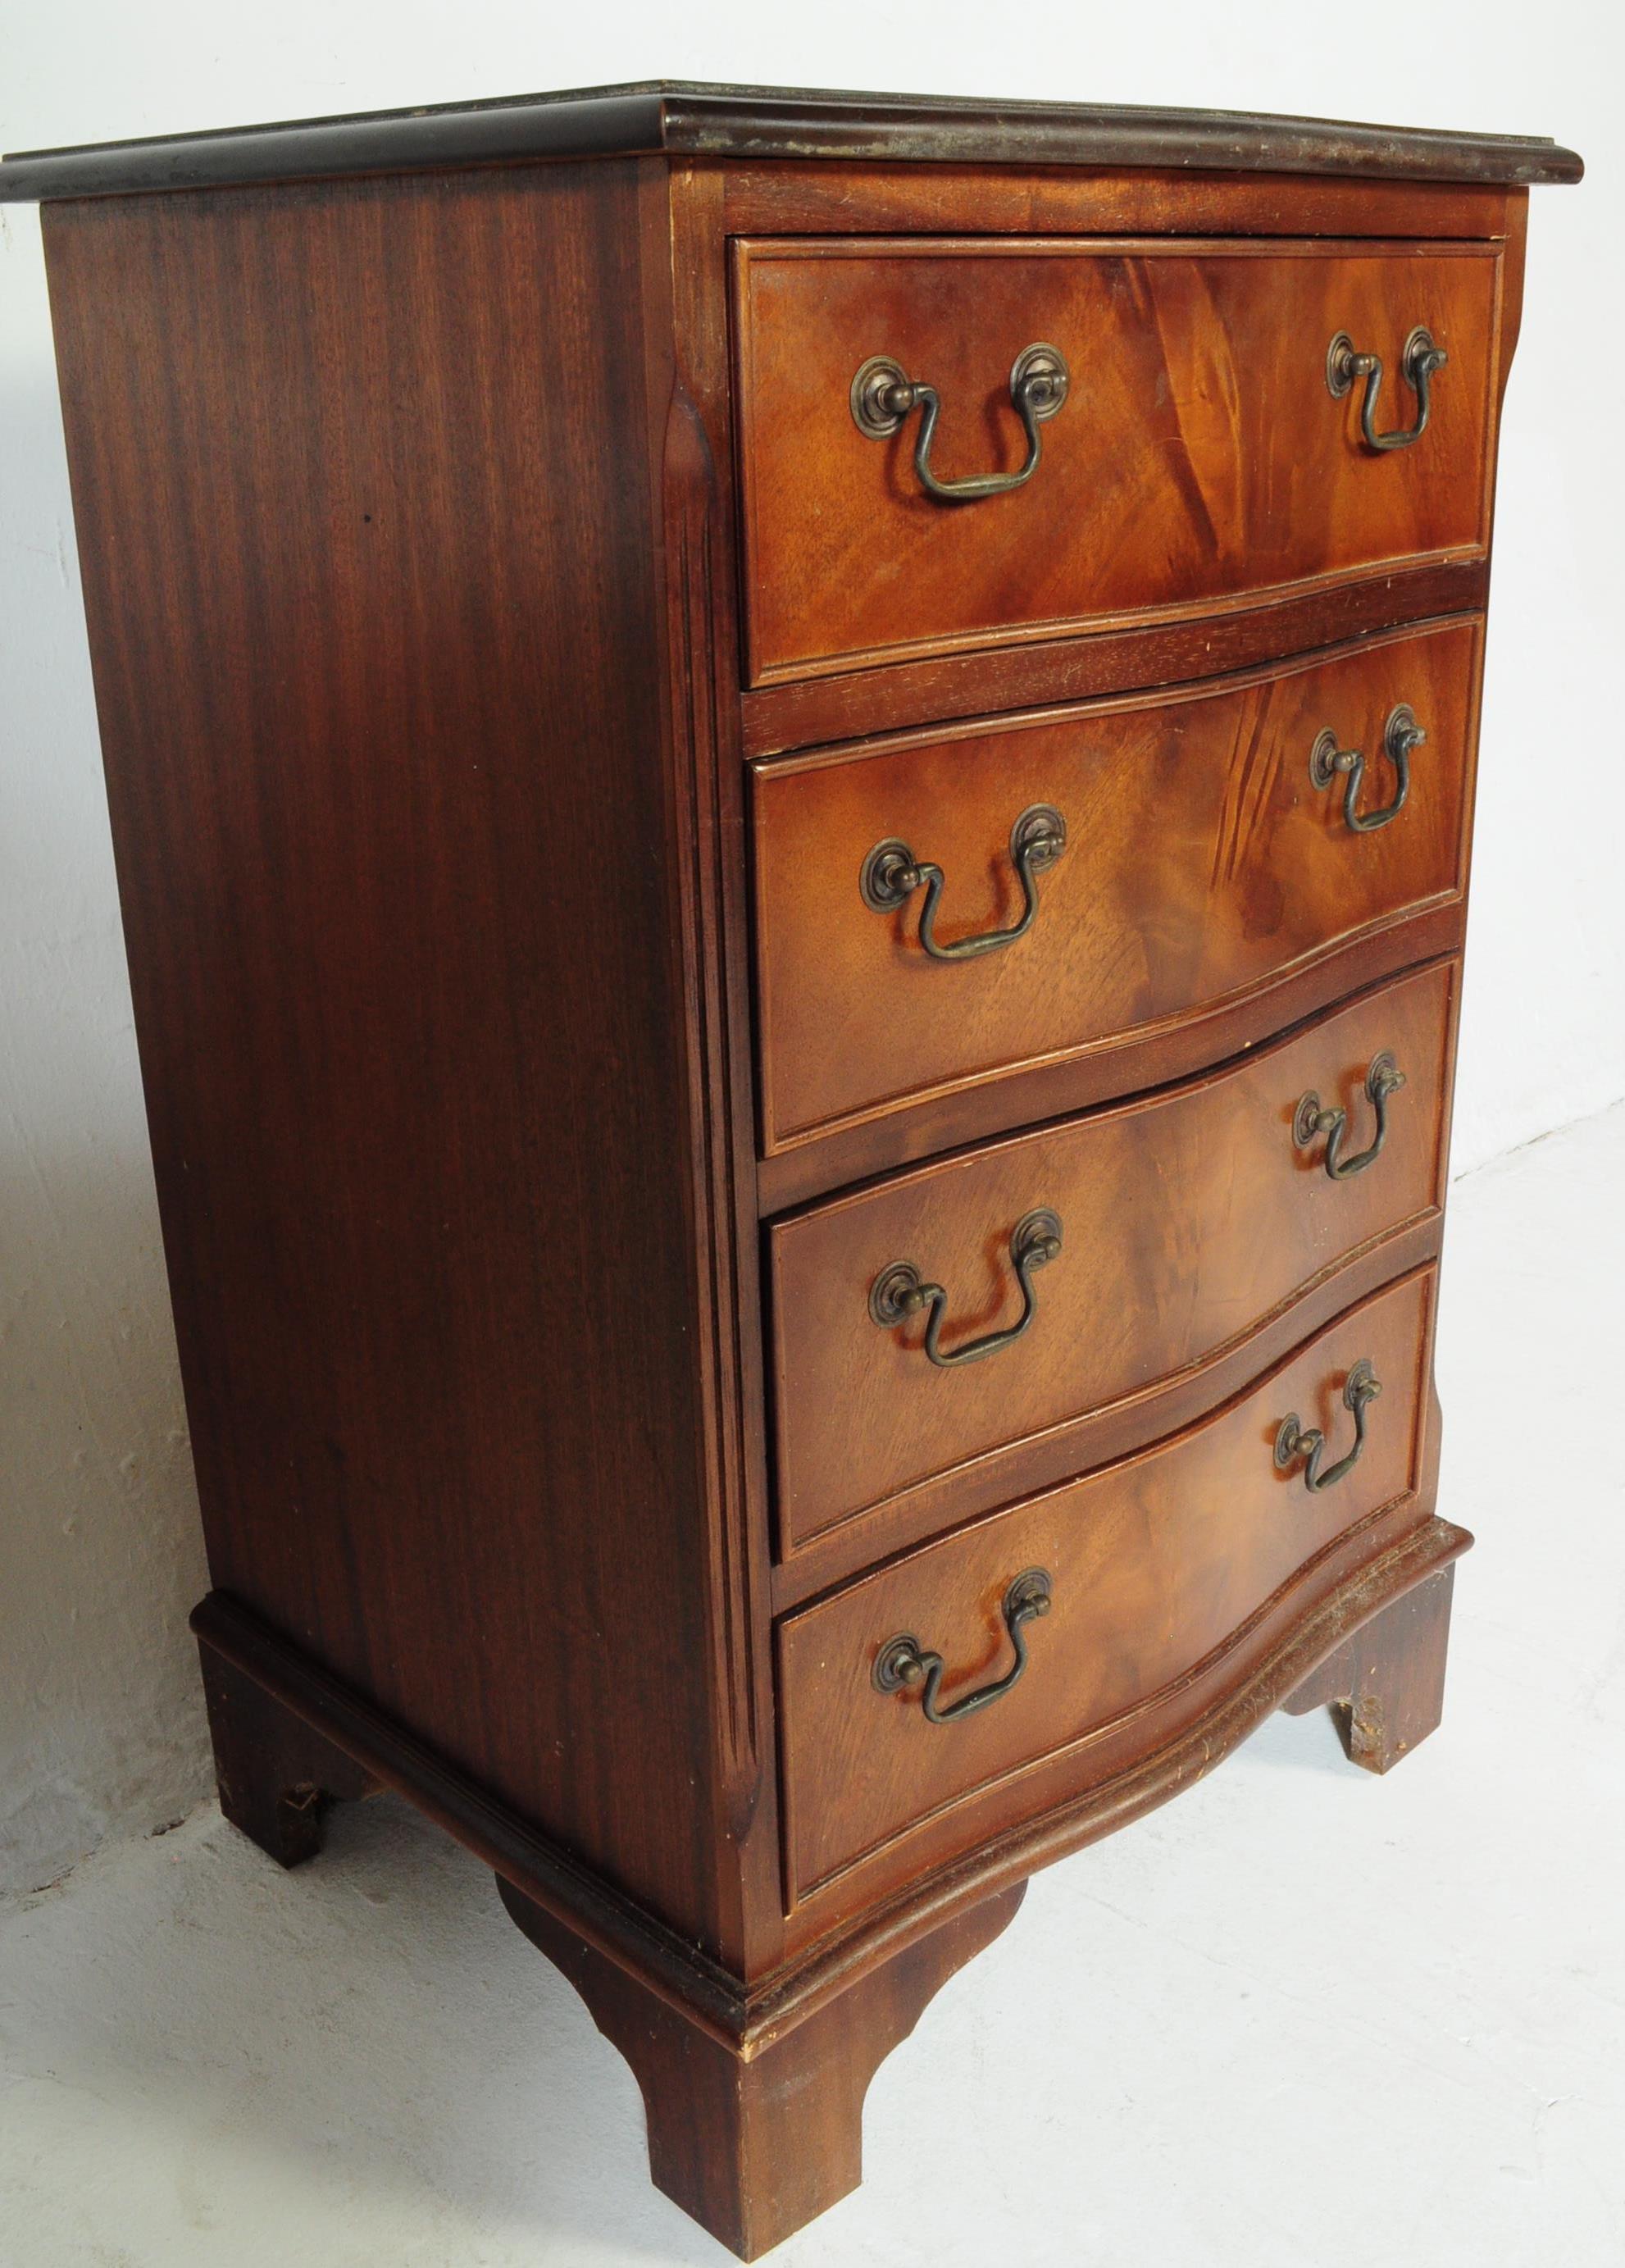 TWO QUEEN ANNE REVIVAL MAHOGANY CHEST OF DRAWERS - Image 3 of 7